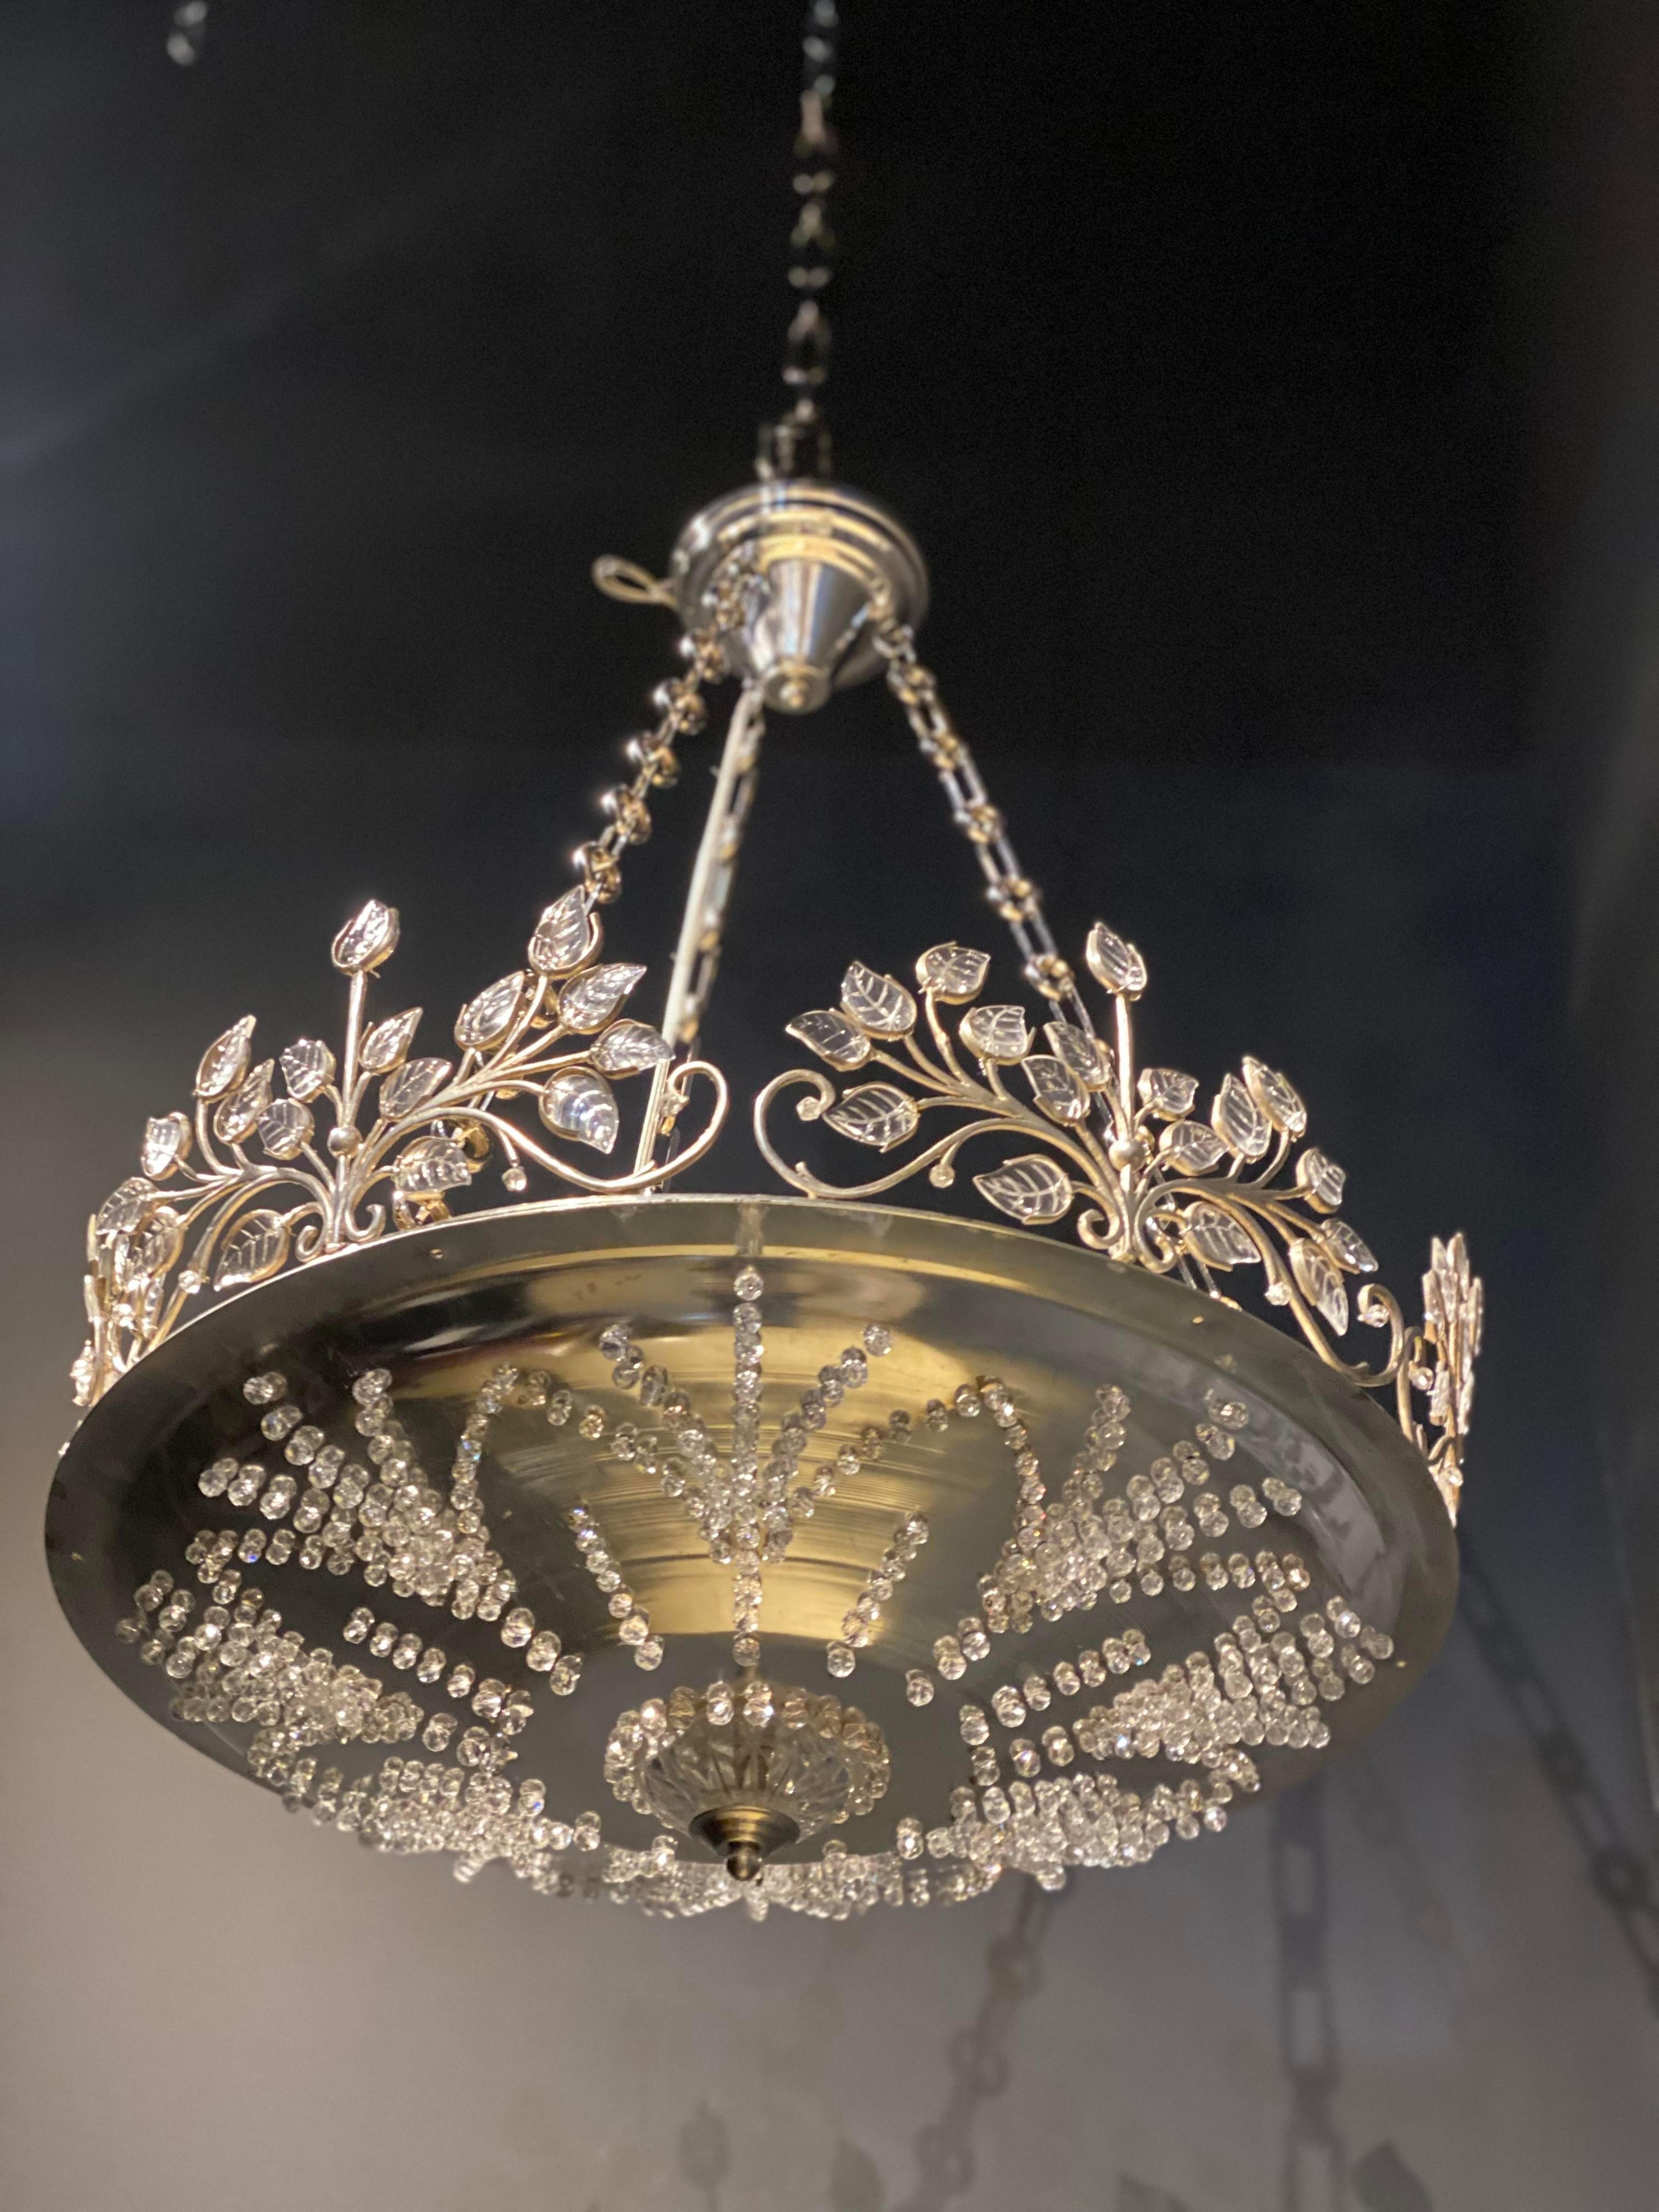 French Provincial 1940’s French Silver Plated Light Fixture For Sale